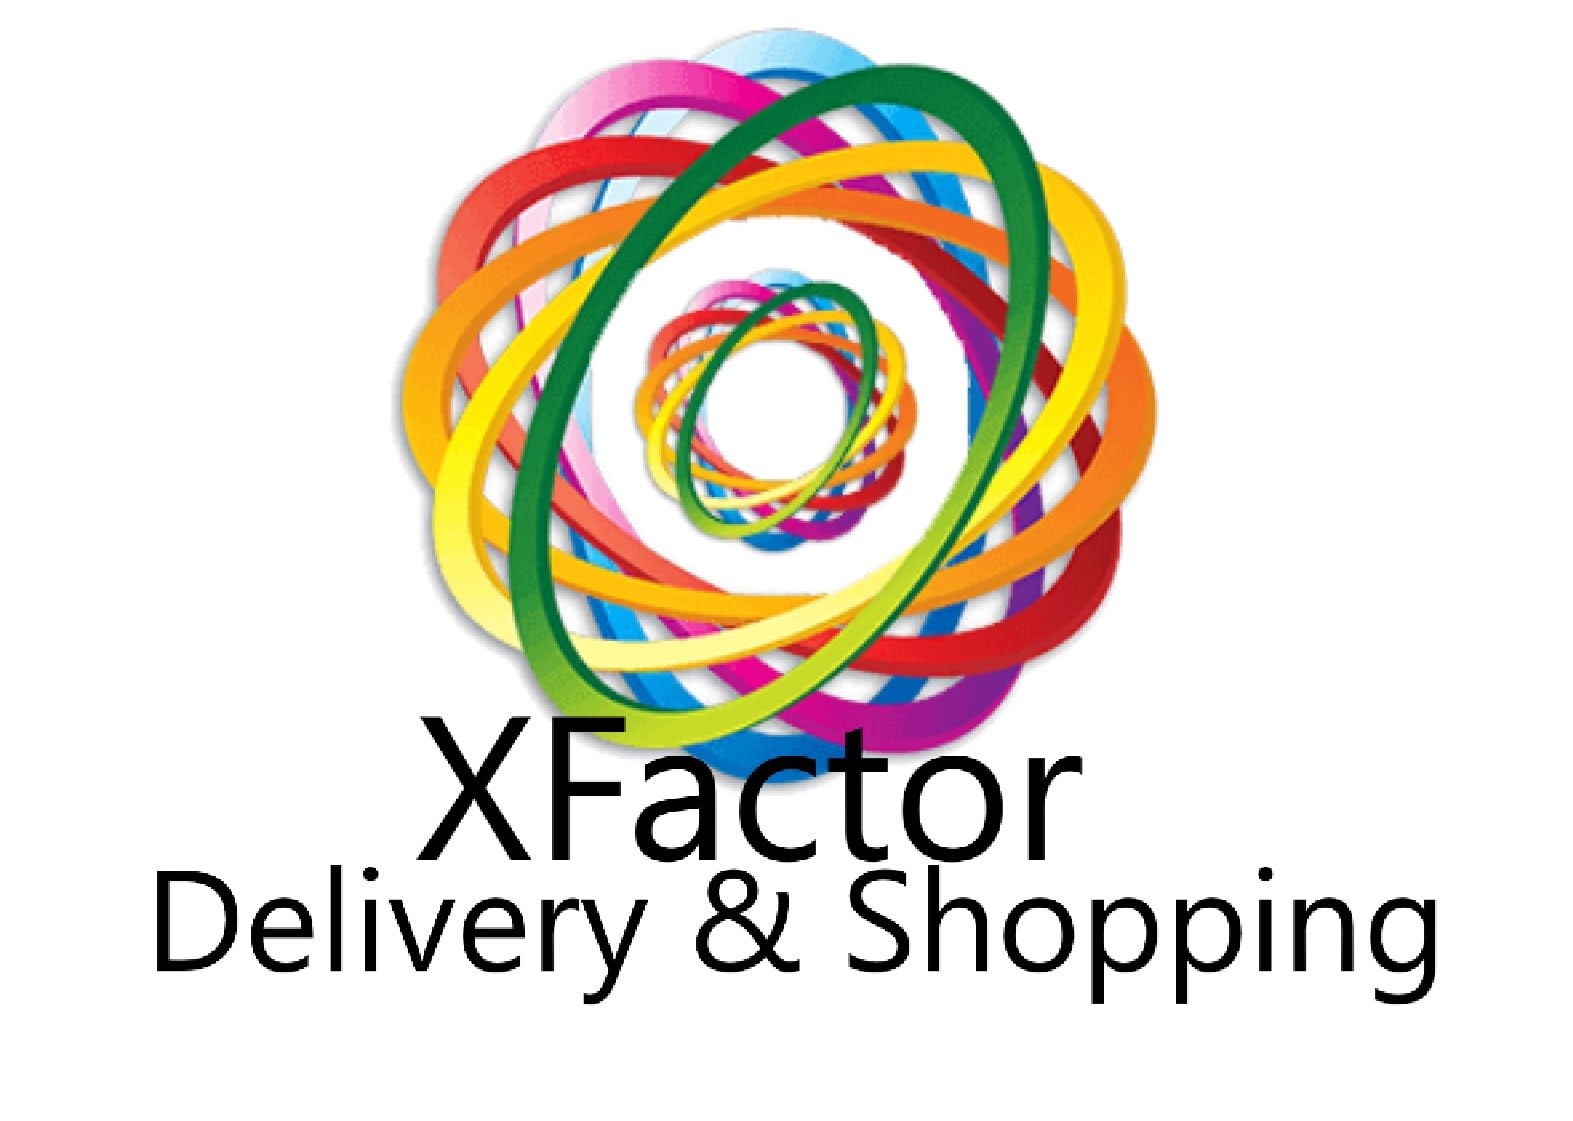 Xfactor Delivery